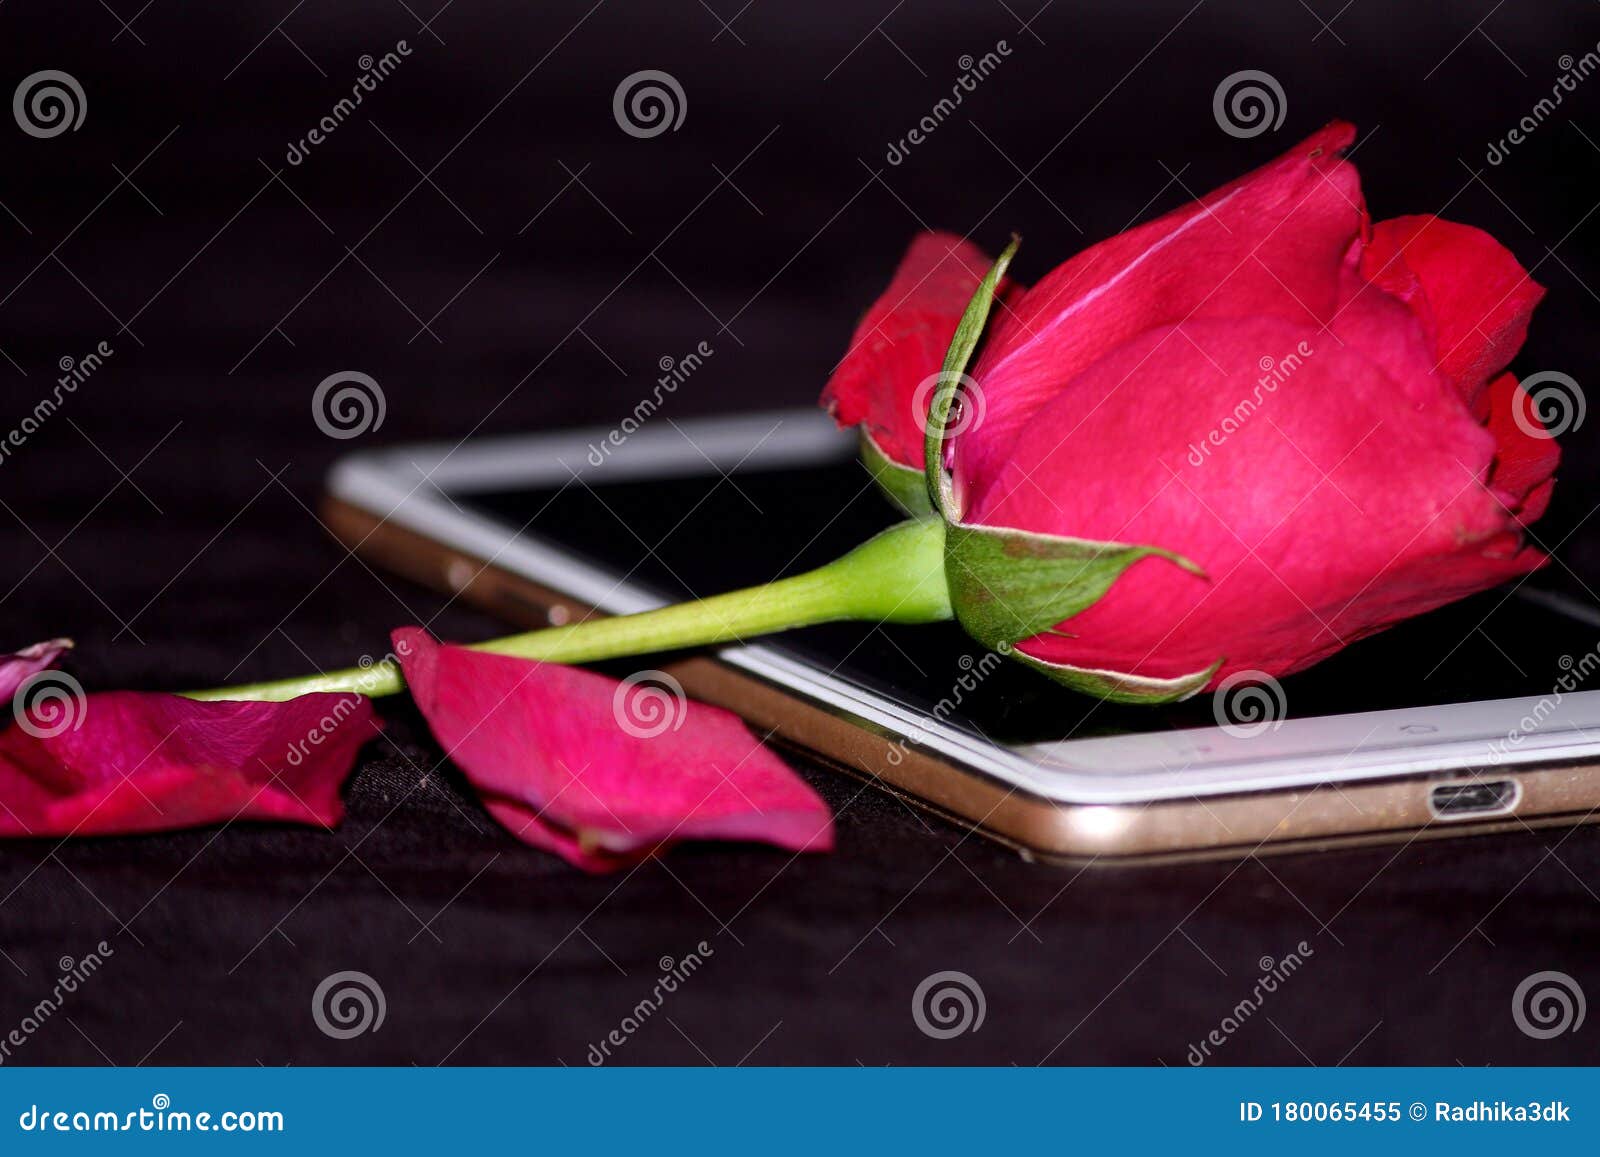 Romantic Proposal, Red Rose Put on Mobile Stock Image - Image of ...